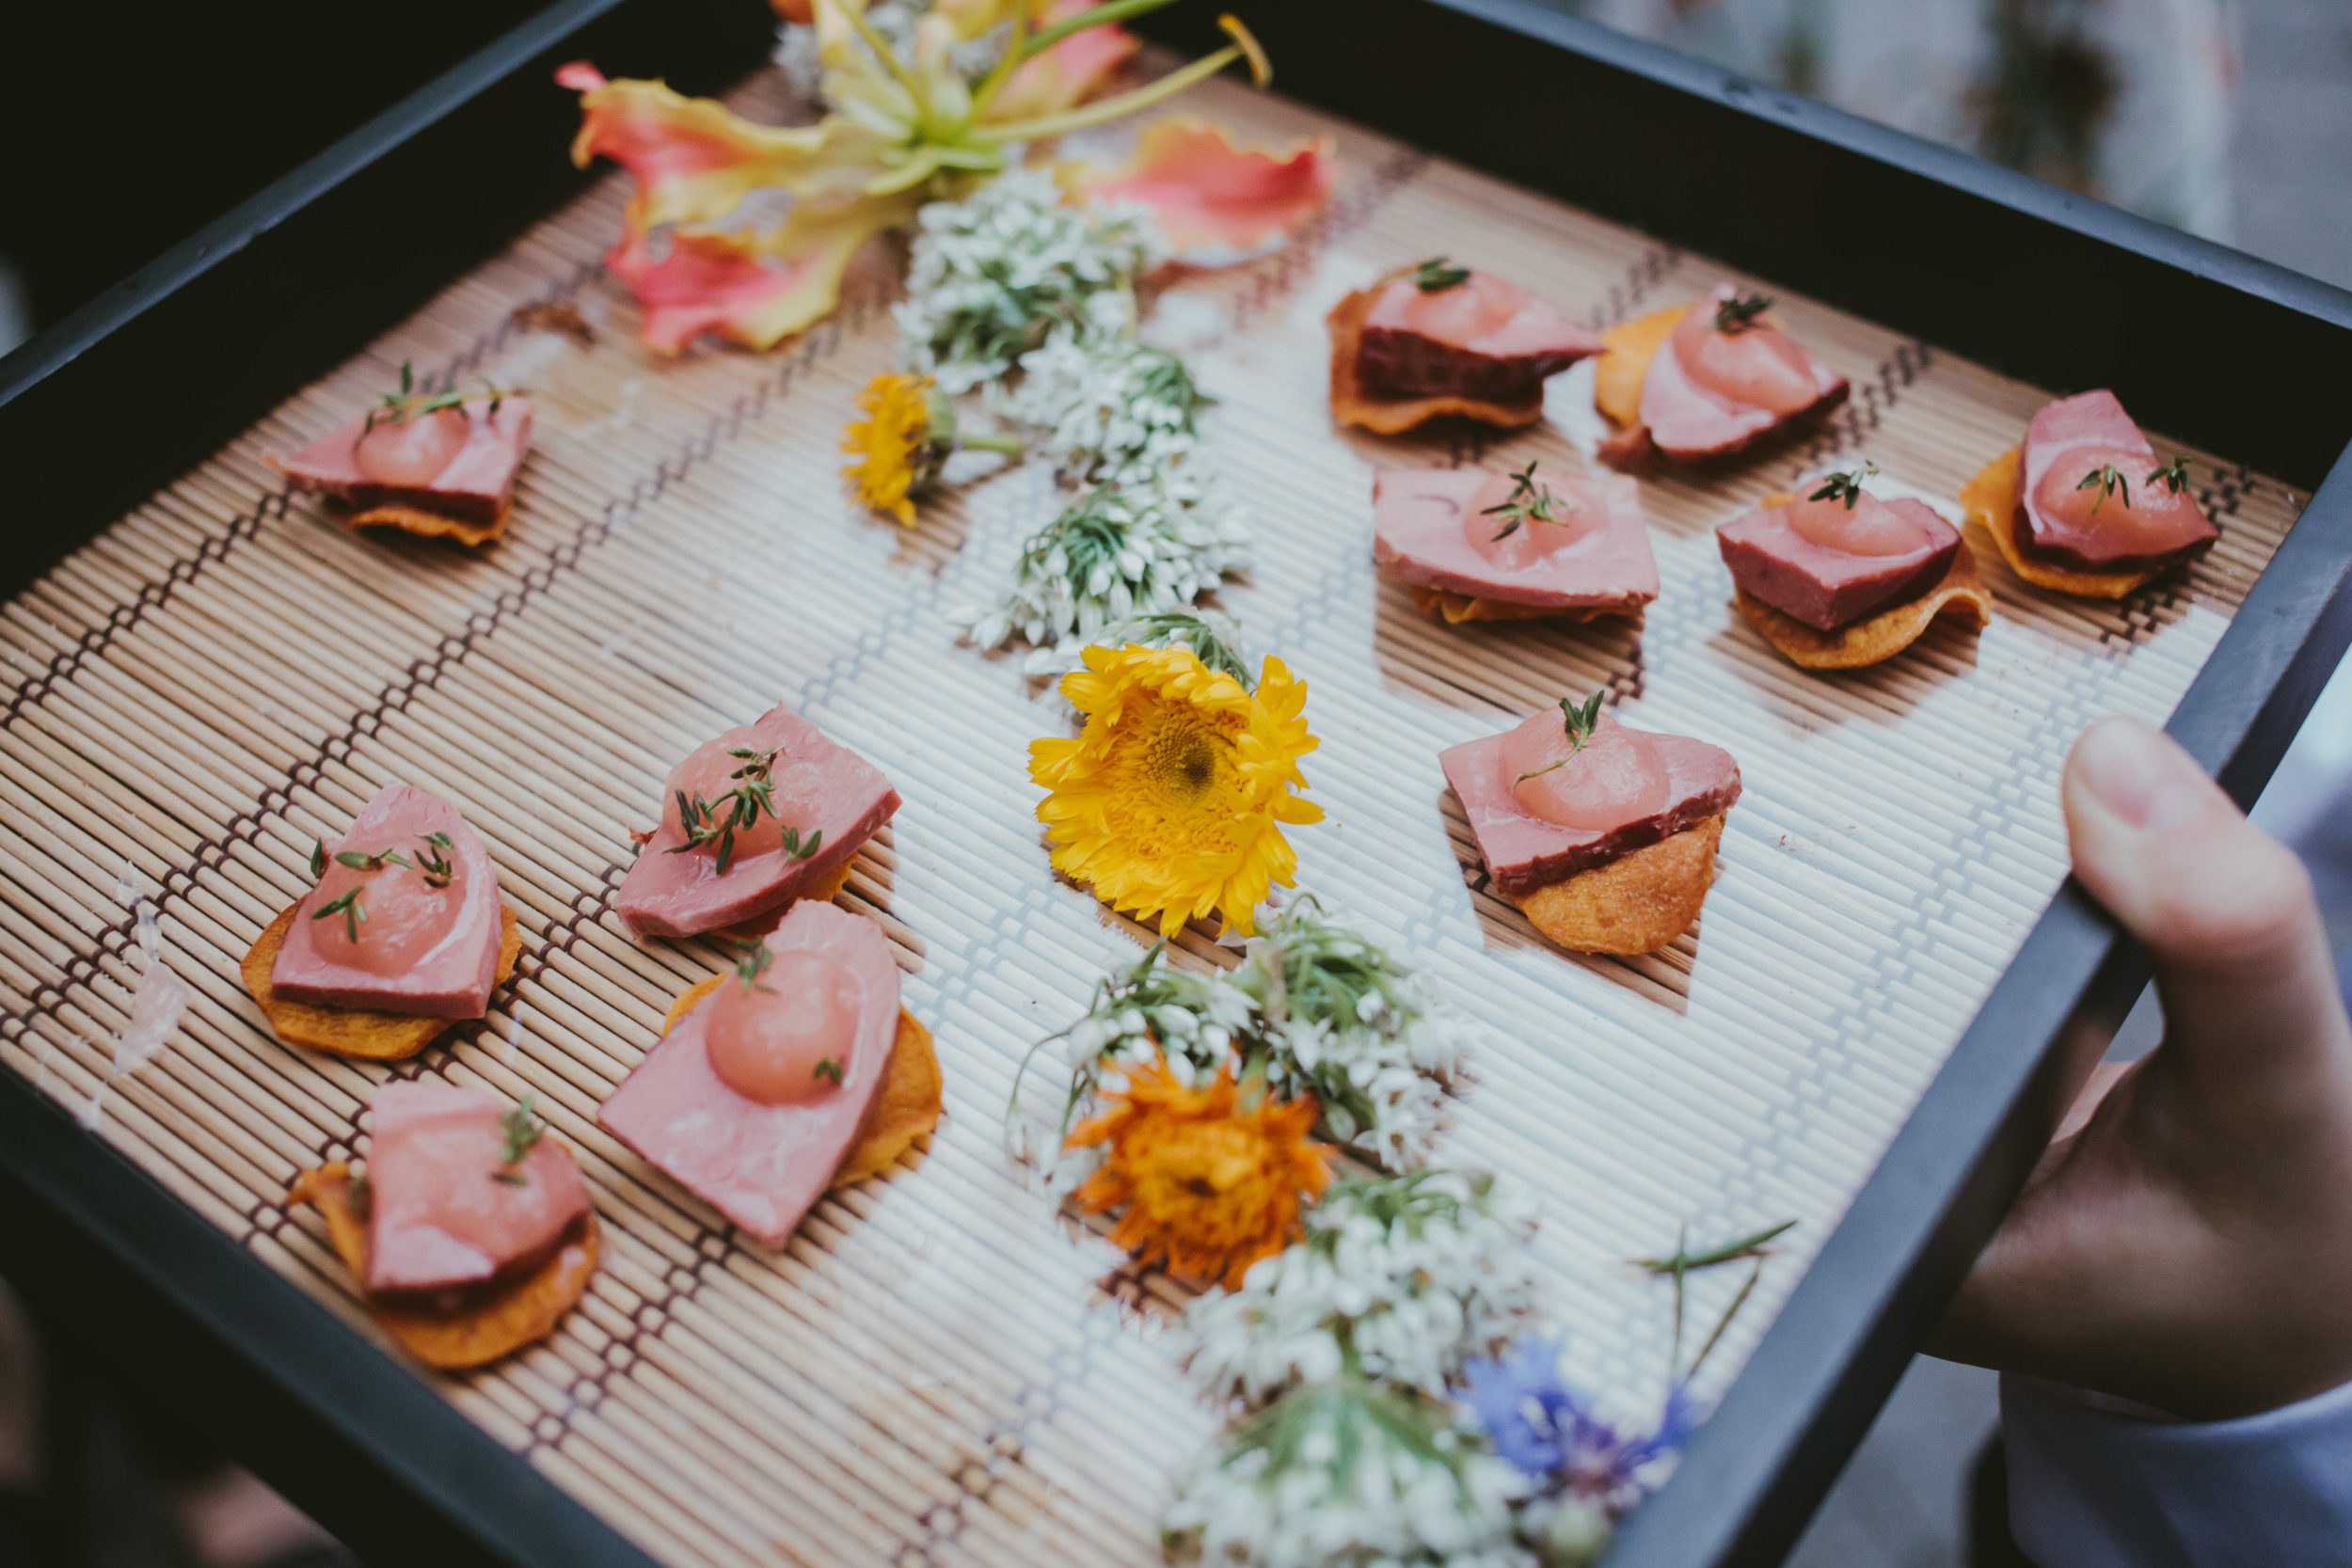 Smoked duck on sweet potato chip with ginger rhubarb compote.JPG